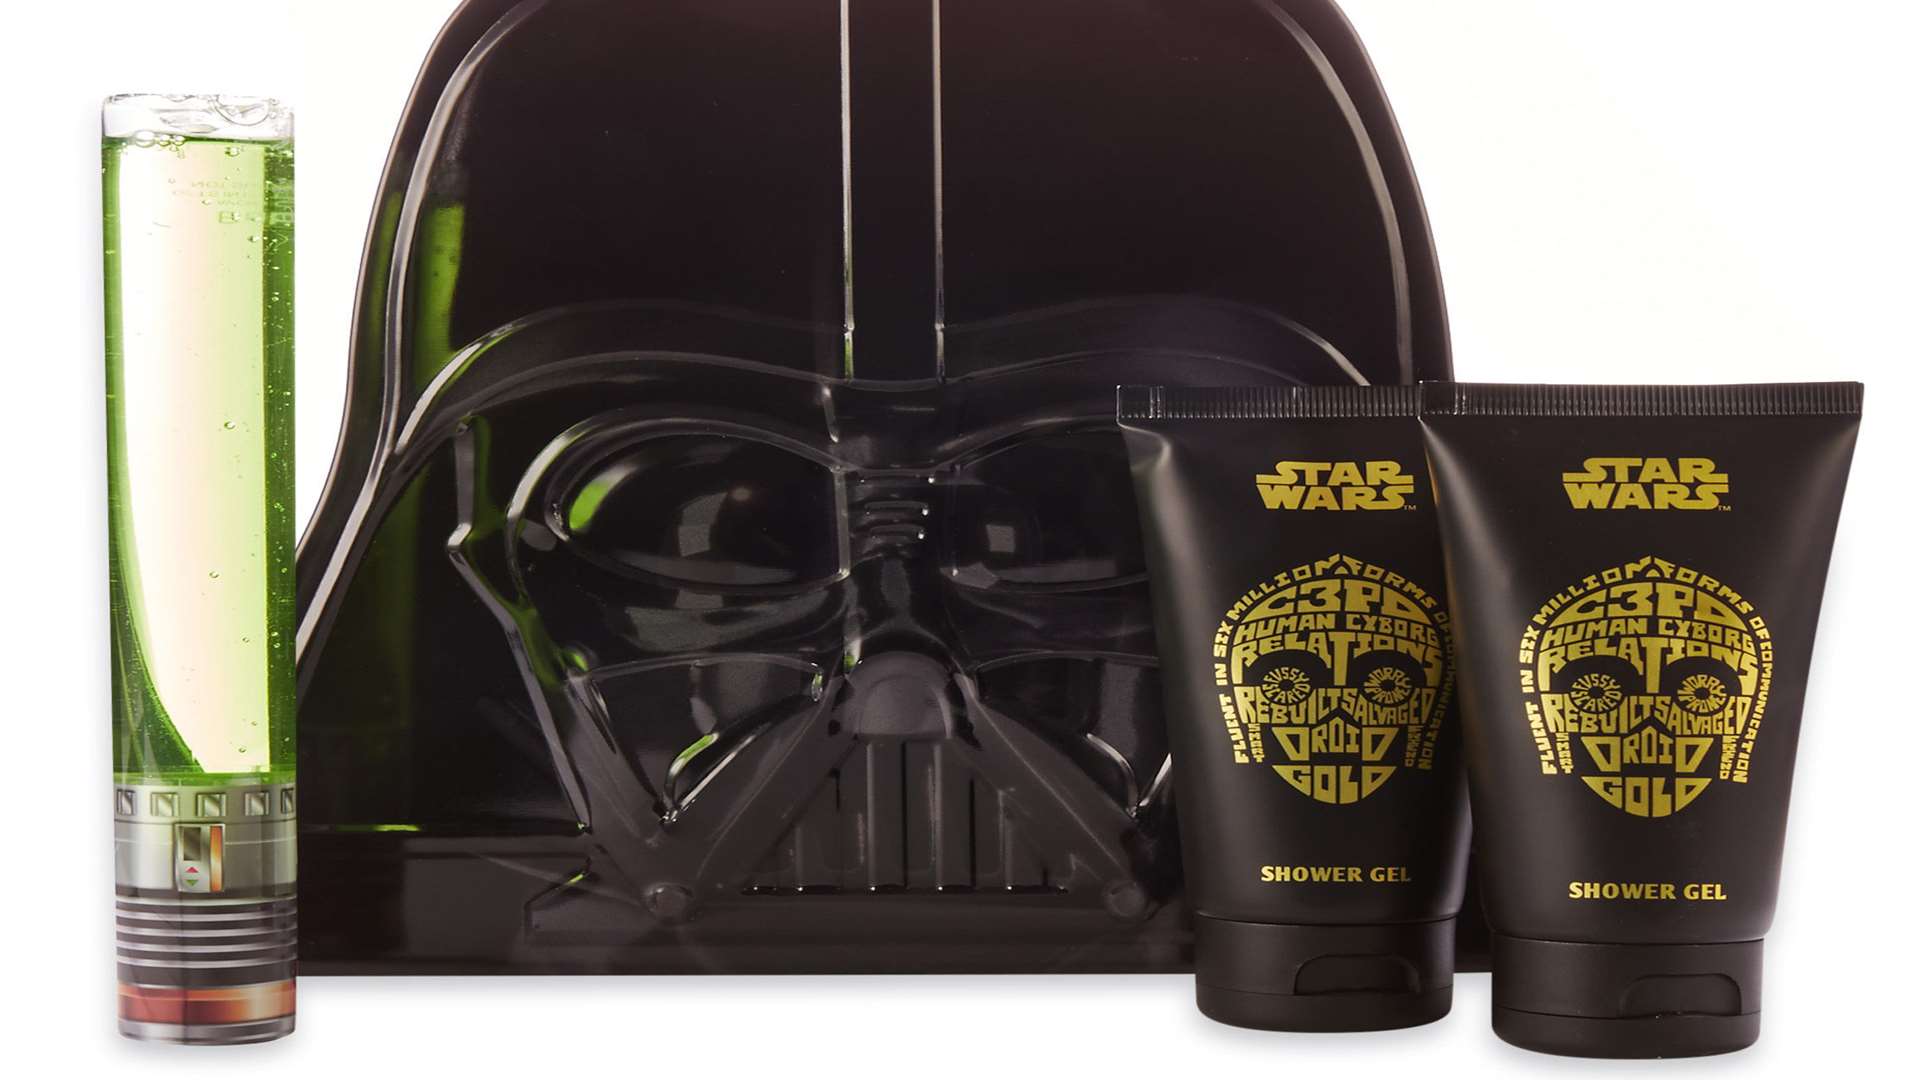 Marks & Spencer's Darth Vader selection makes for a very tongue-in-cheek gift, seeing as the Sith Lord wasn't exactly a model father himself. It costs £20.